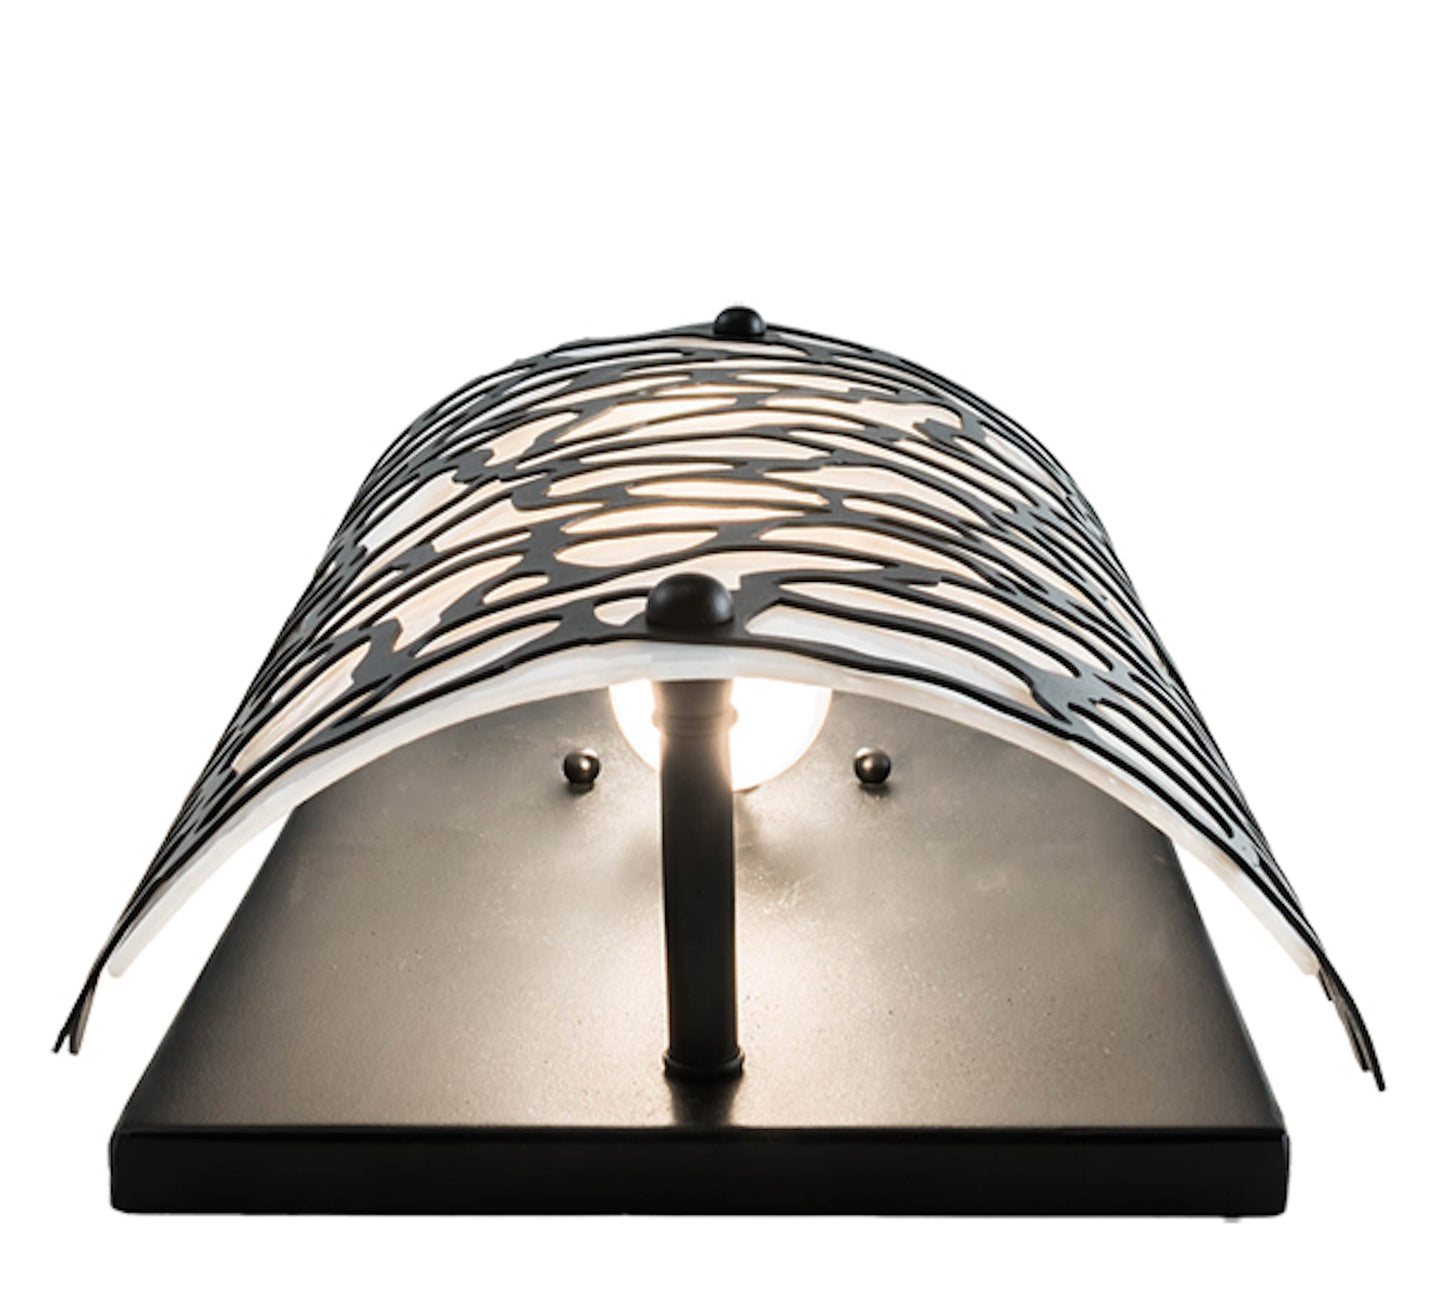 10" Parmecia Wall Sconce by 2nd Ave Lighting